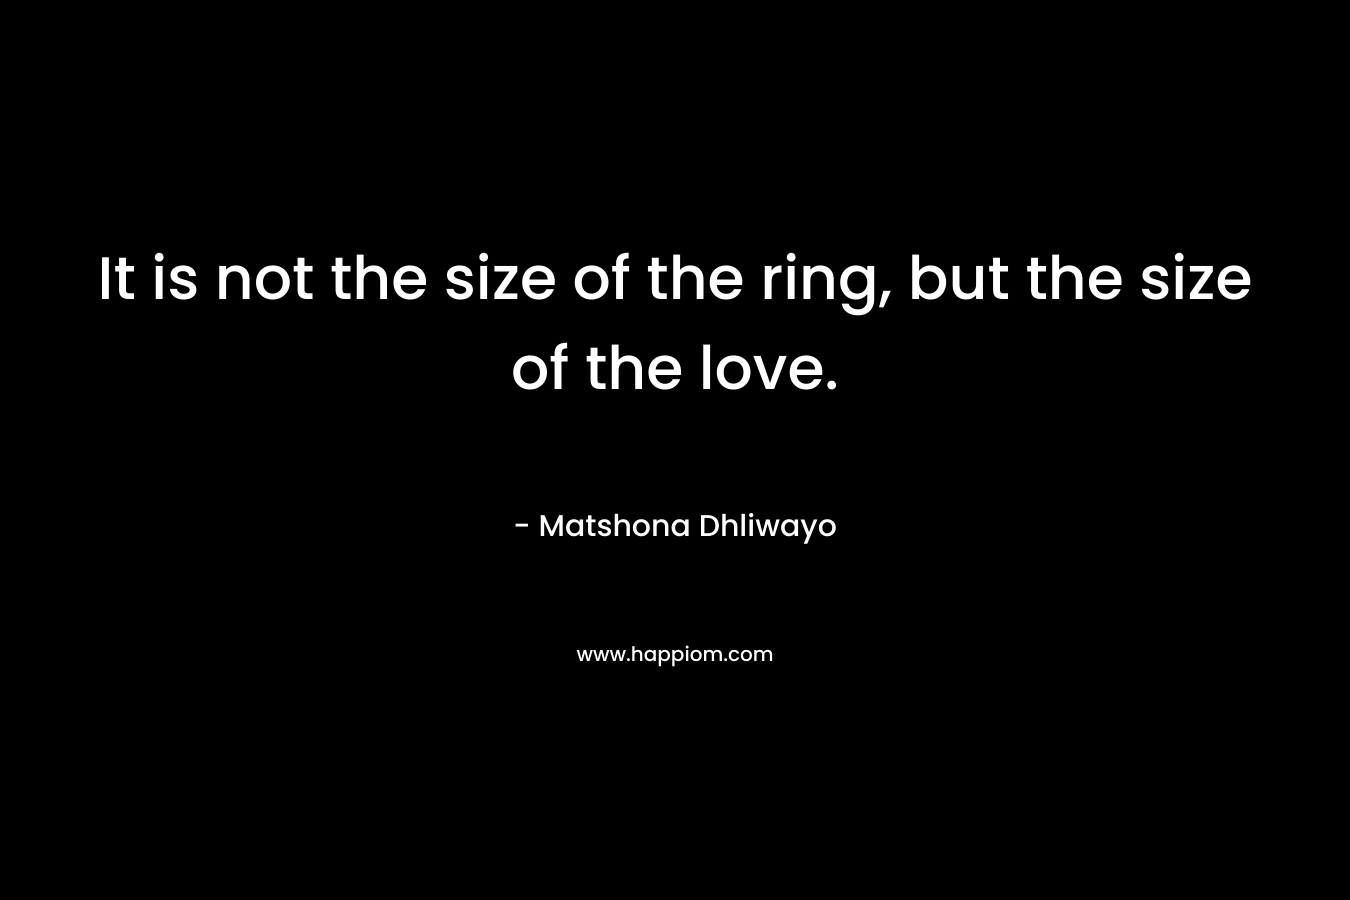 It is not the size of the ring, but the size of the love.